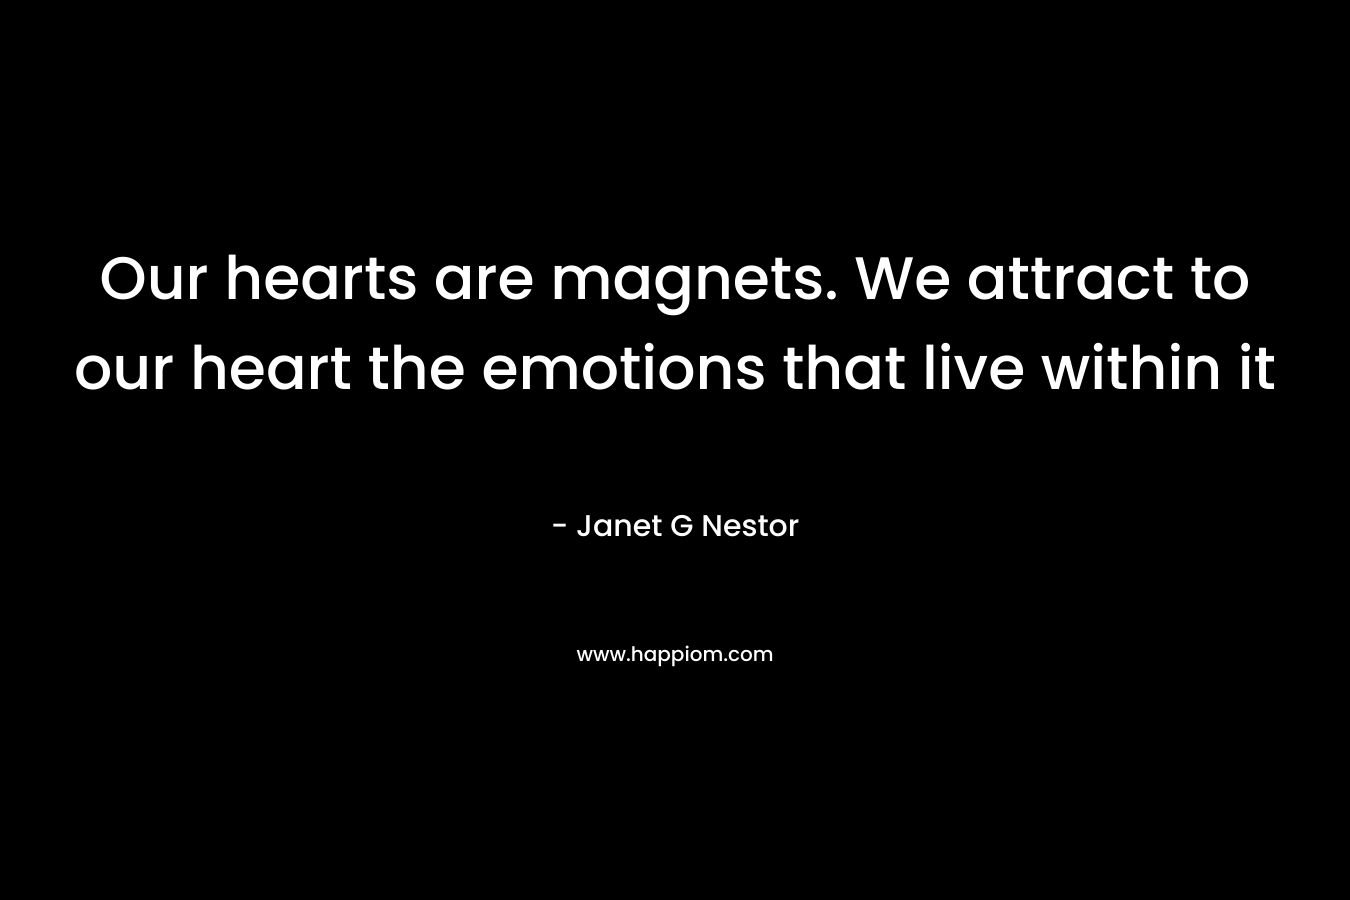 Our hearts are magnets. We attract to our heart the emotions that live within it – Janet G Nestor